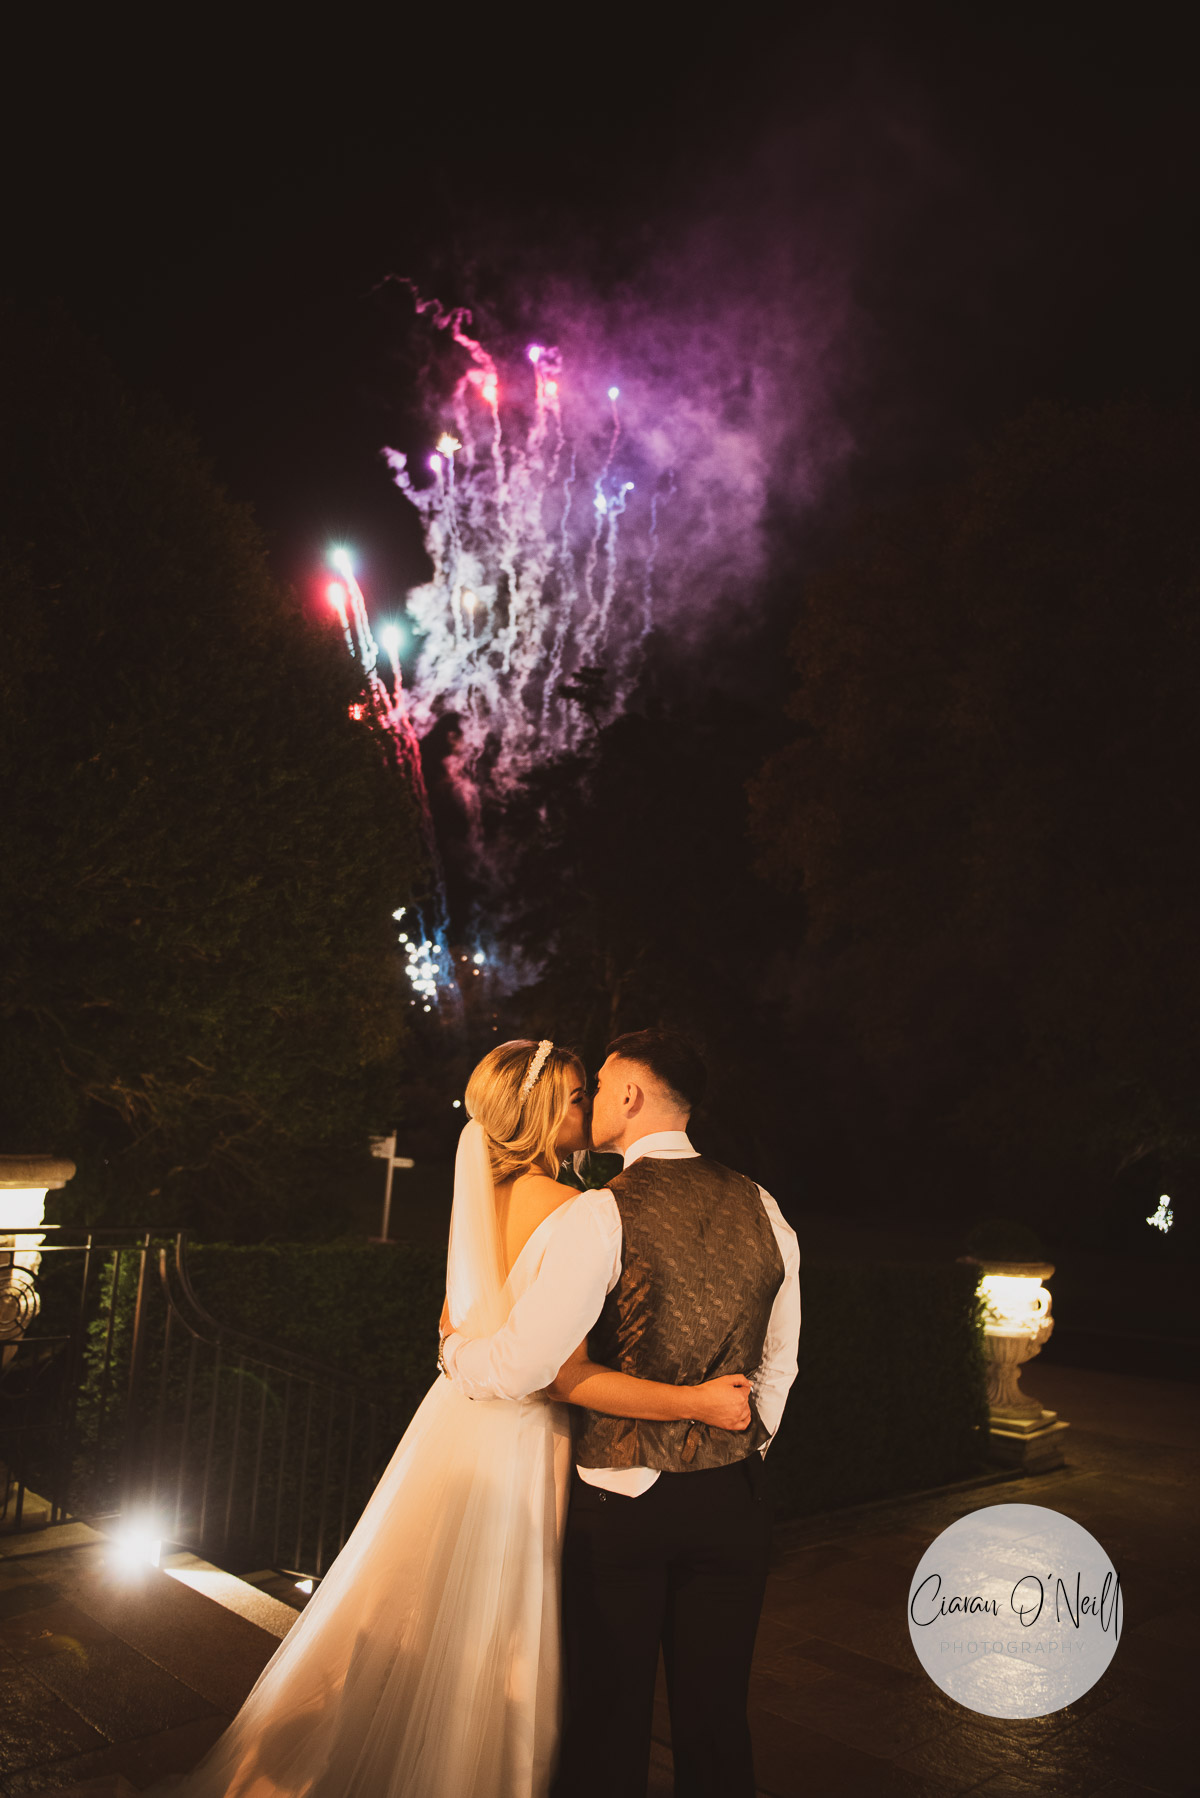 Couple kissing as fireworks go off in the night